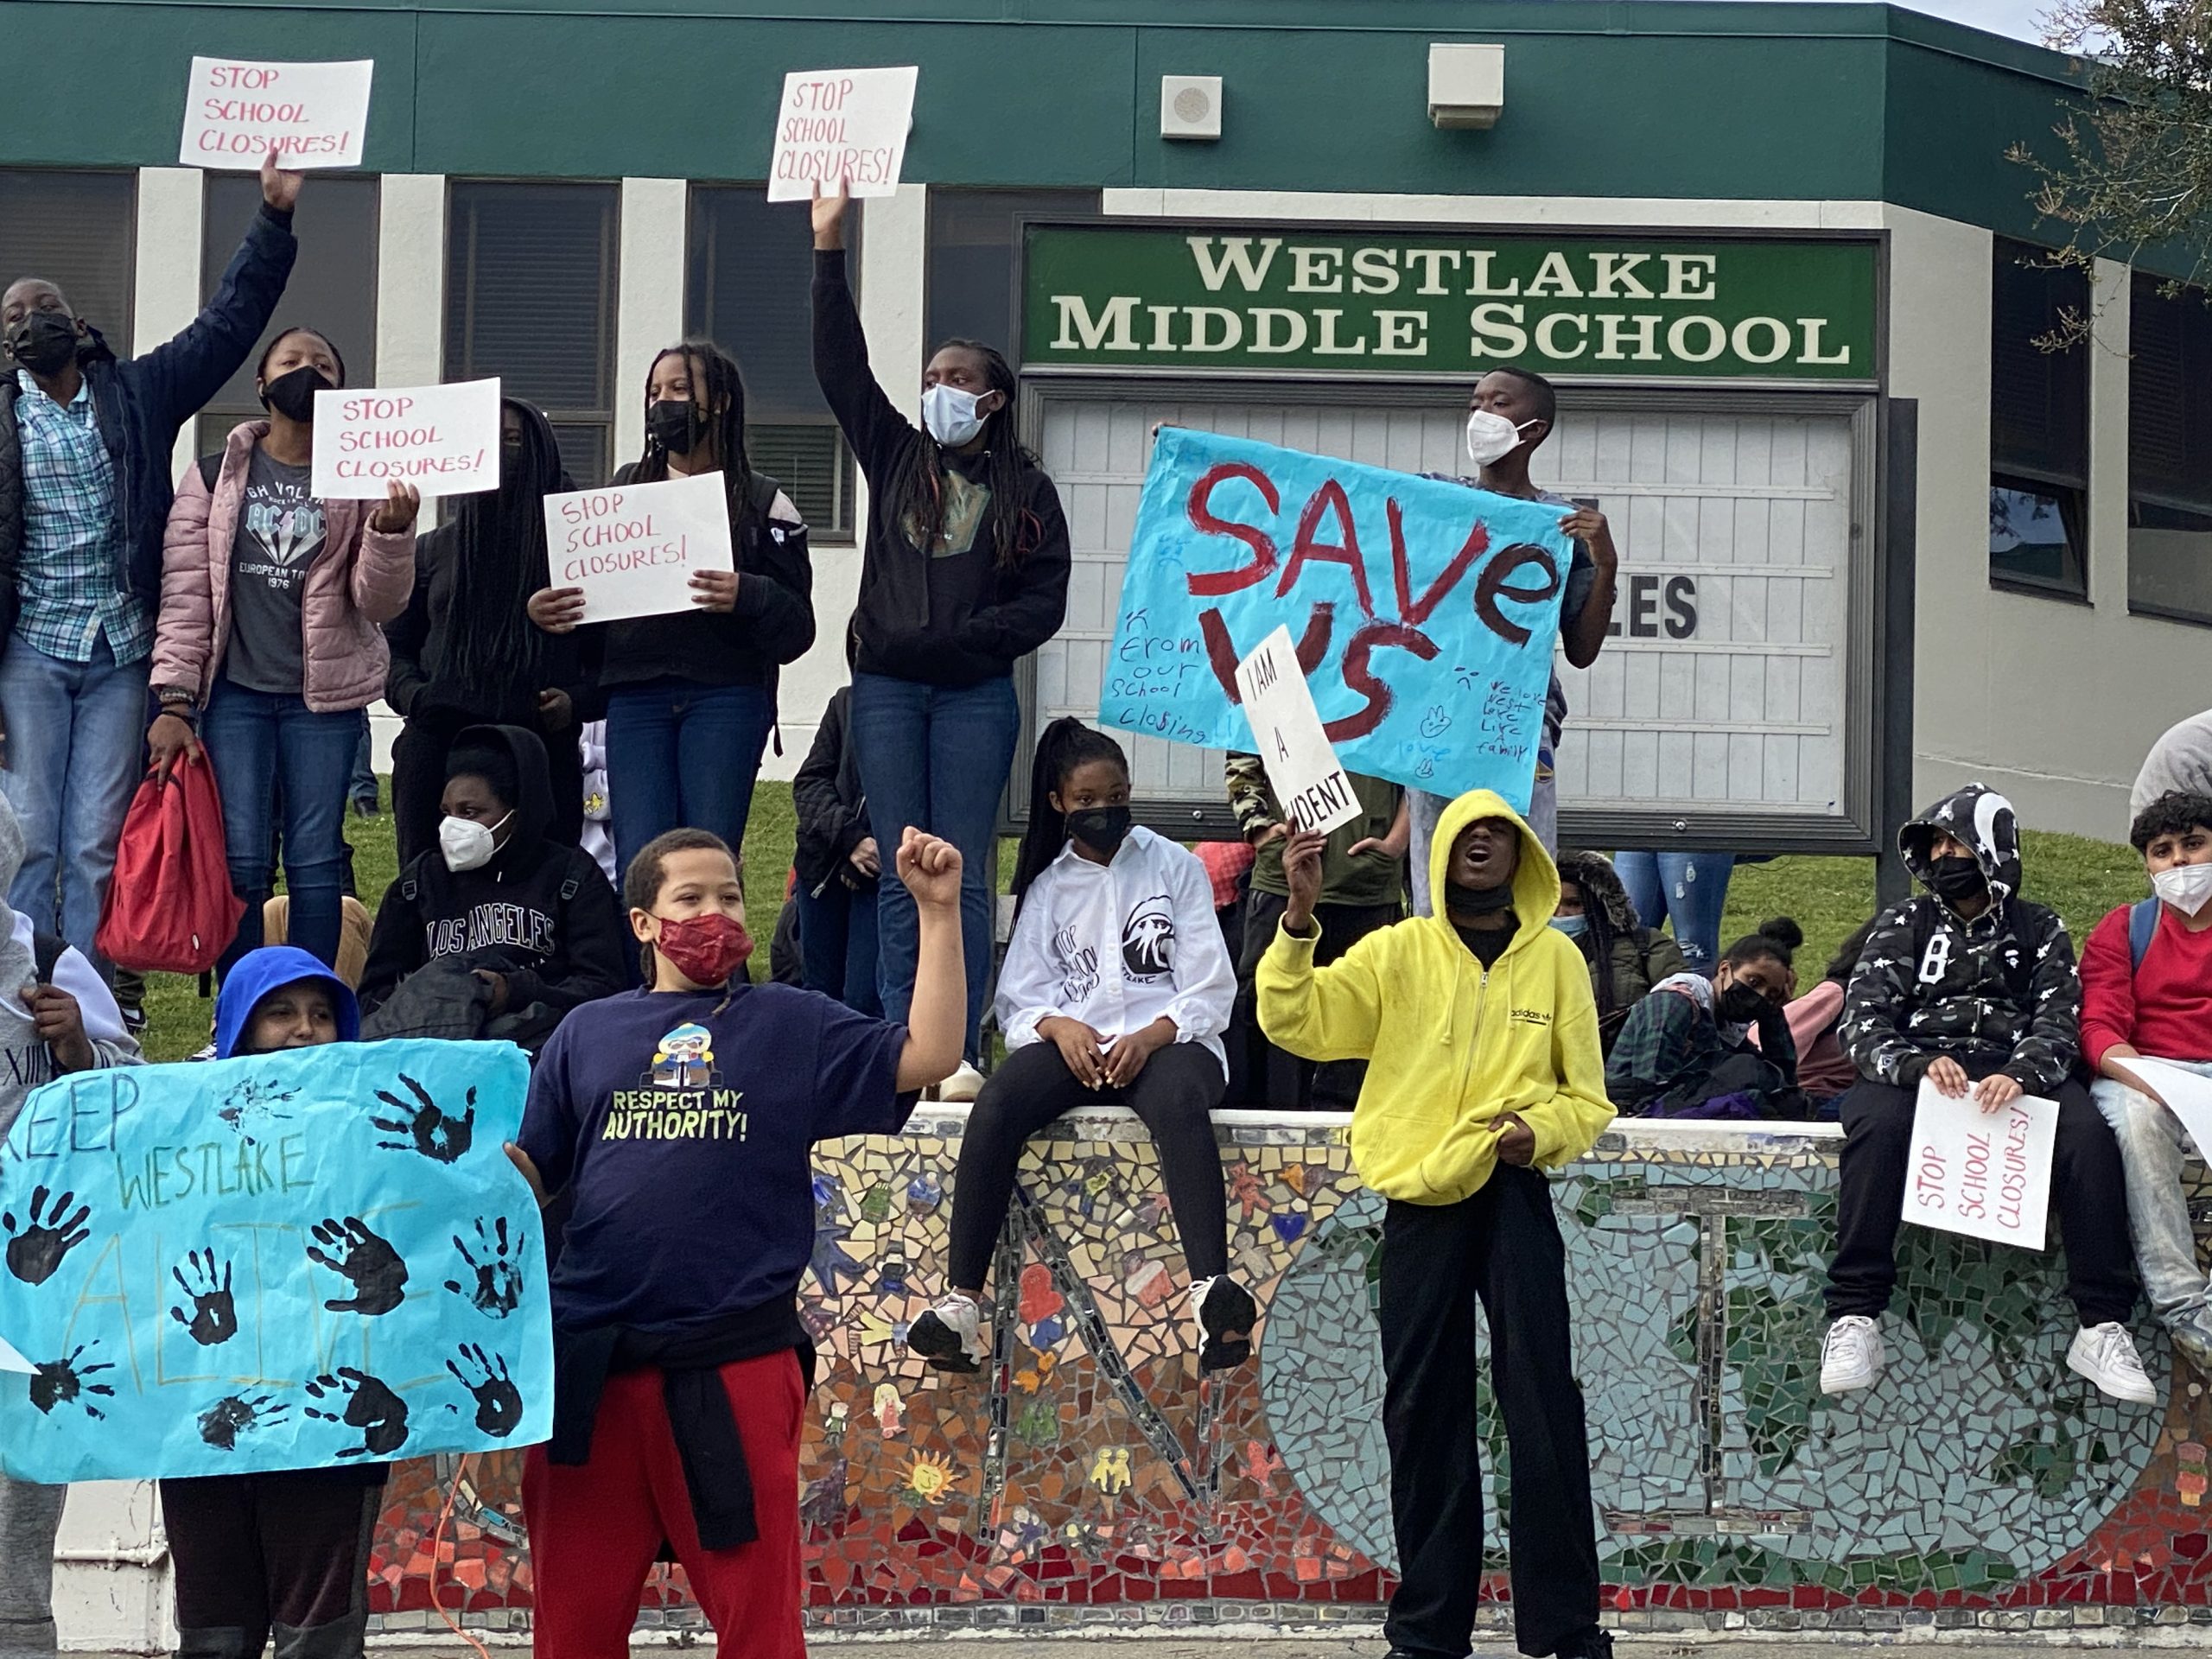 students holding signs outside middle school saying "save us"